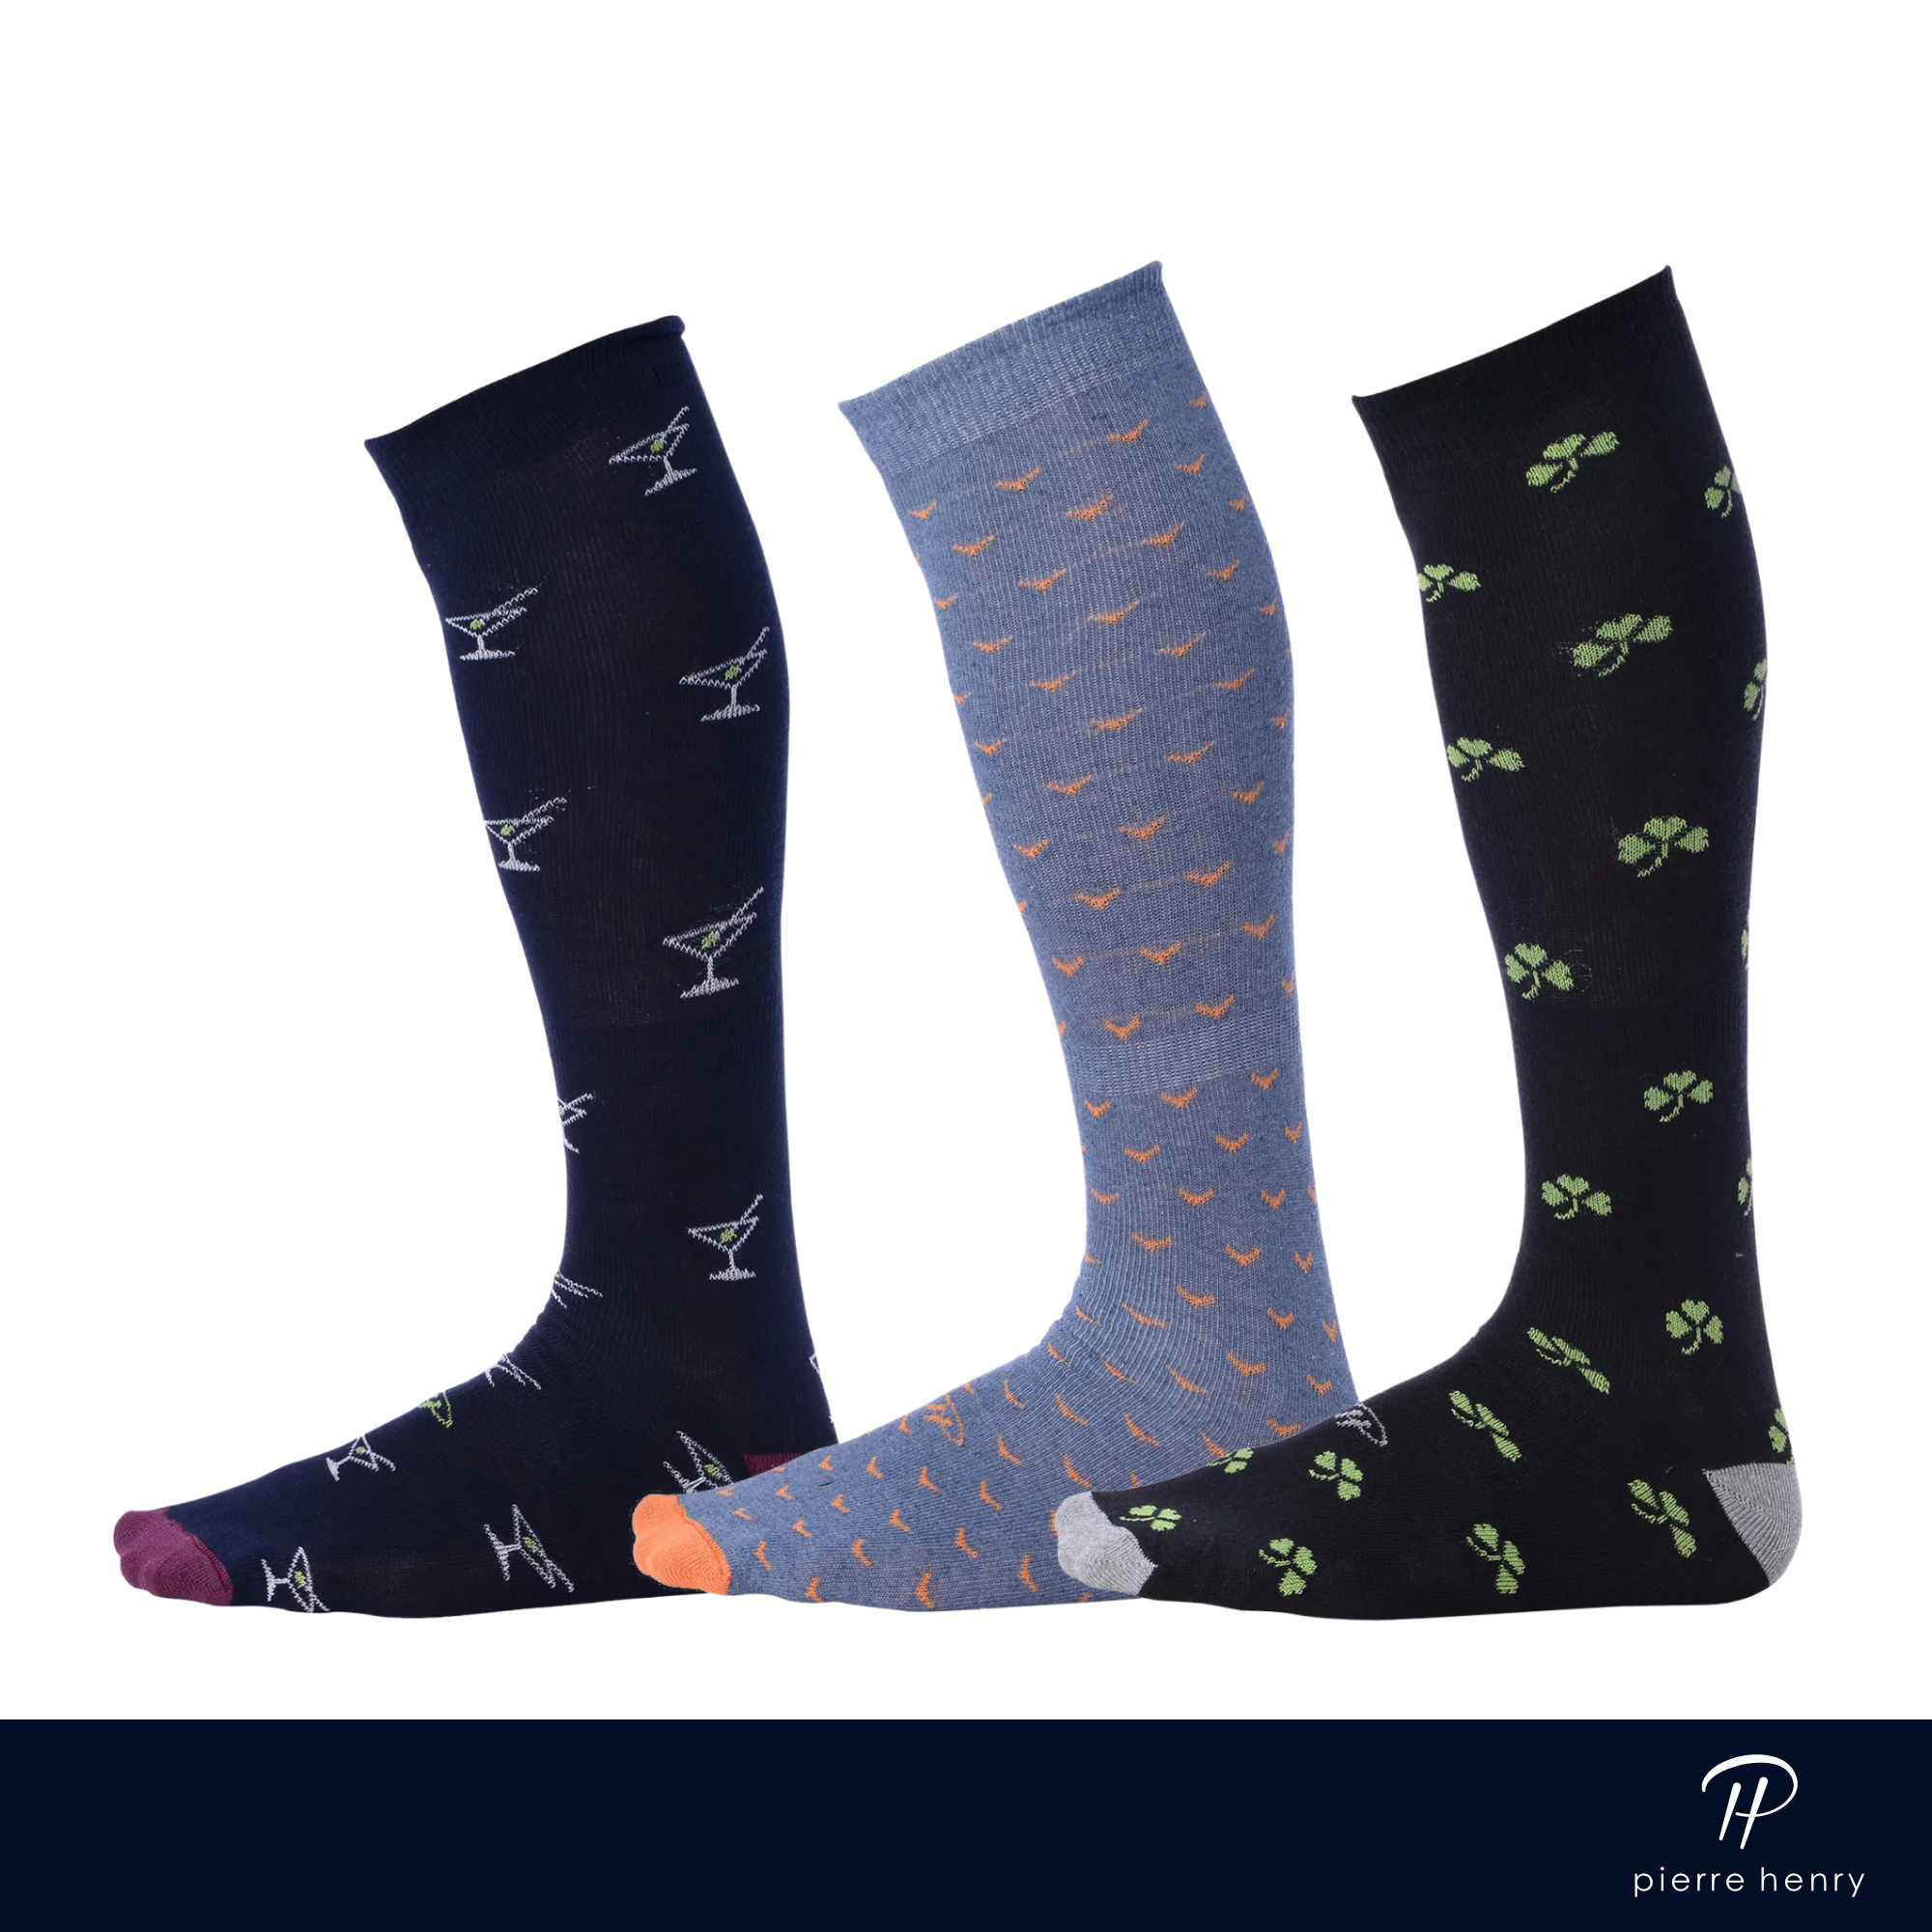 navy over the calf dress socks with cocktails, light blue over the calf dress socks with birds, black over the calf dress socks with clovers